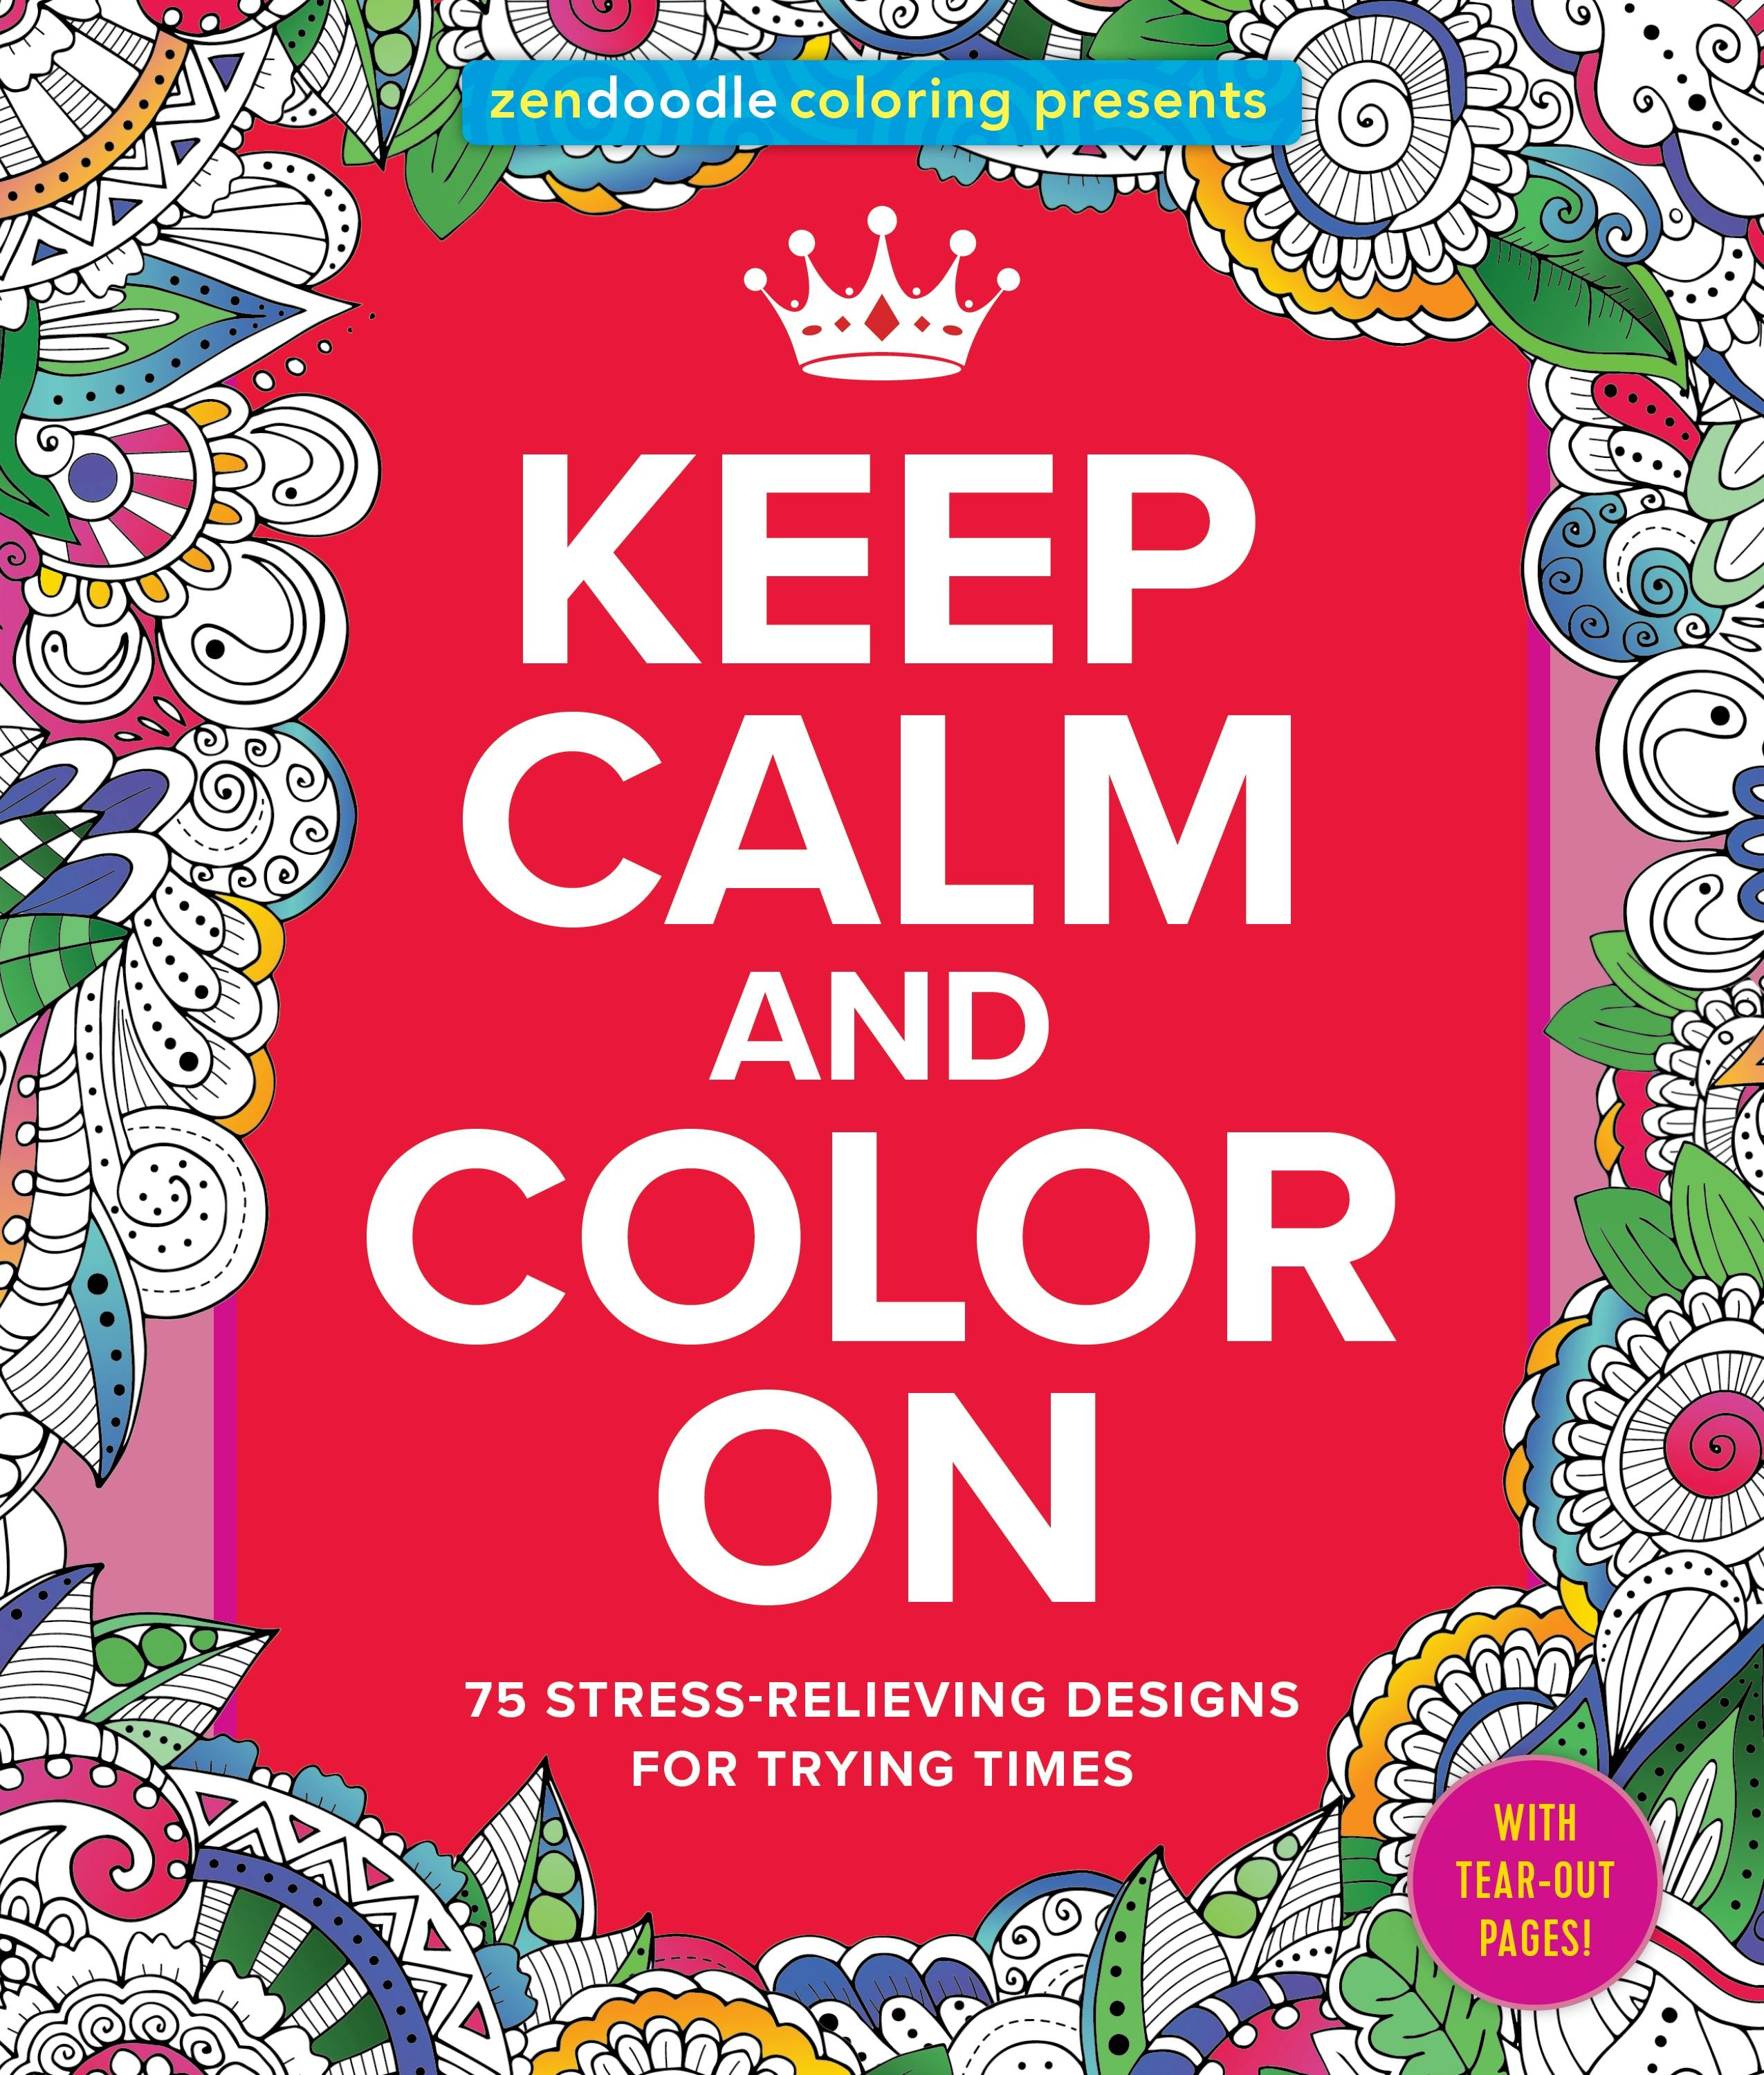 Zendoodle Coloring Presents Keep Calm and Color On